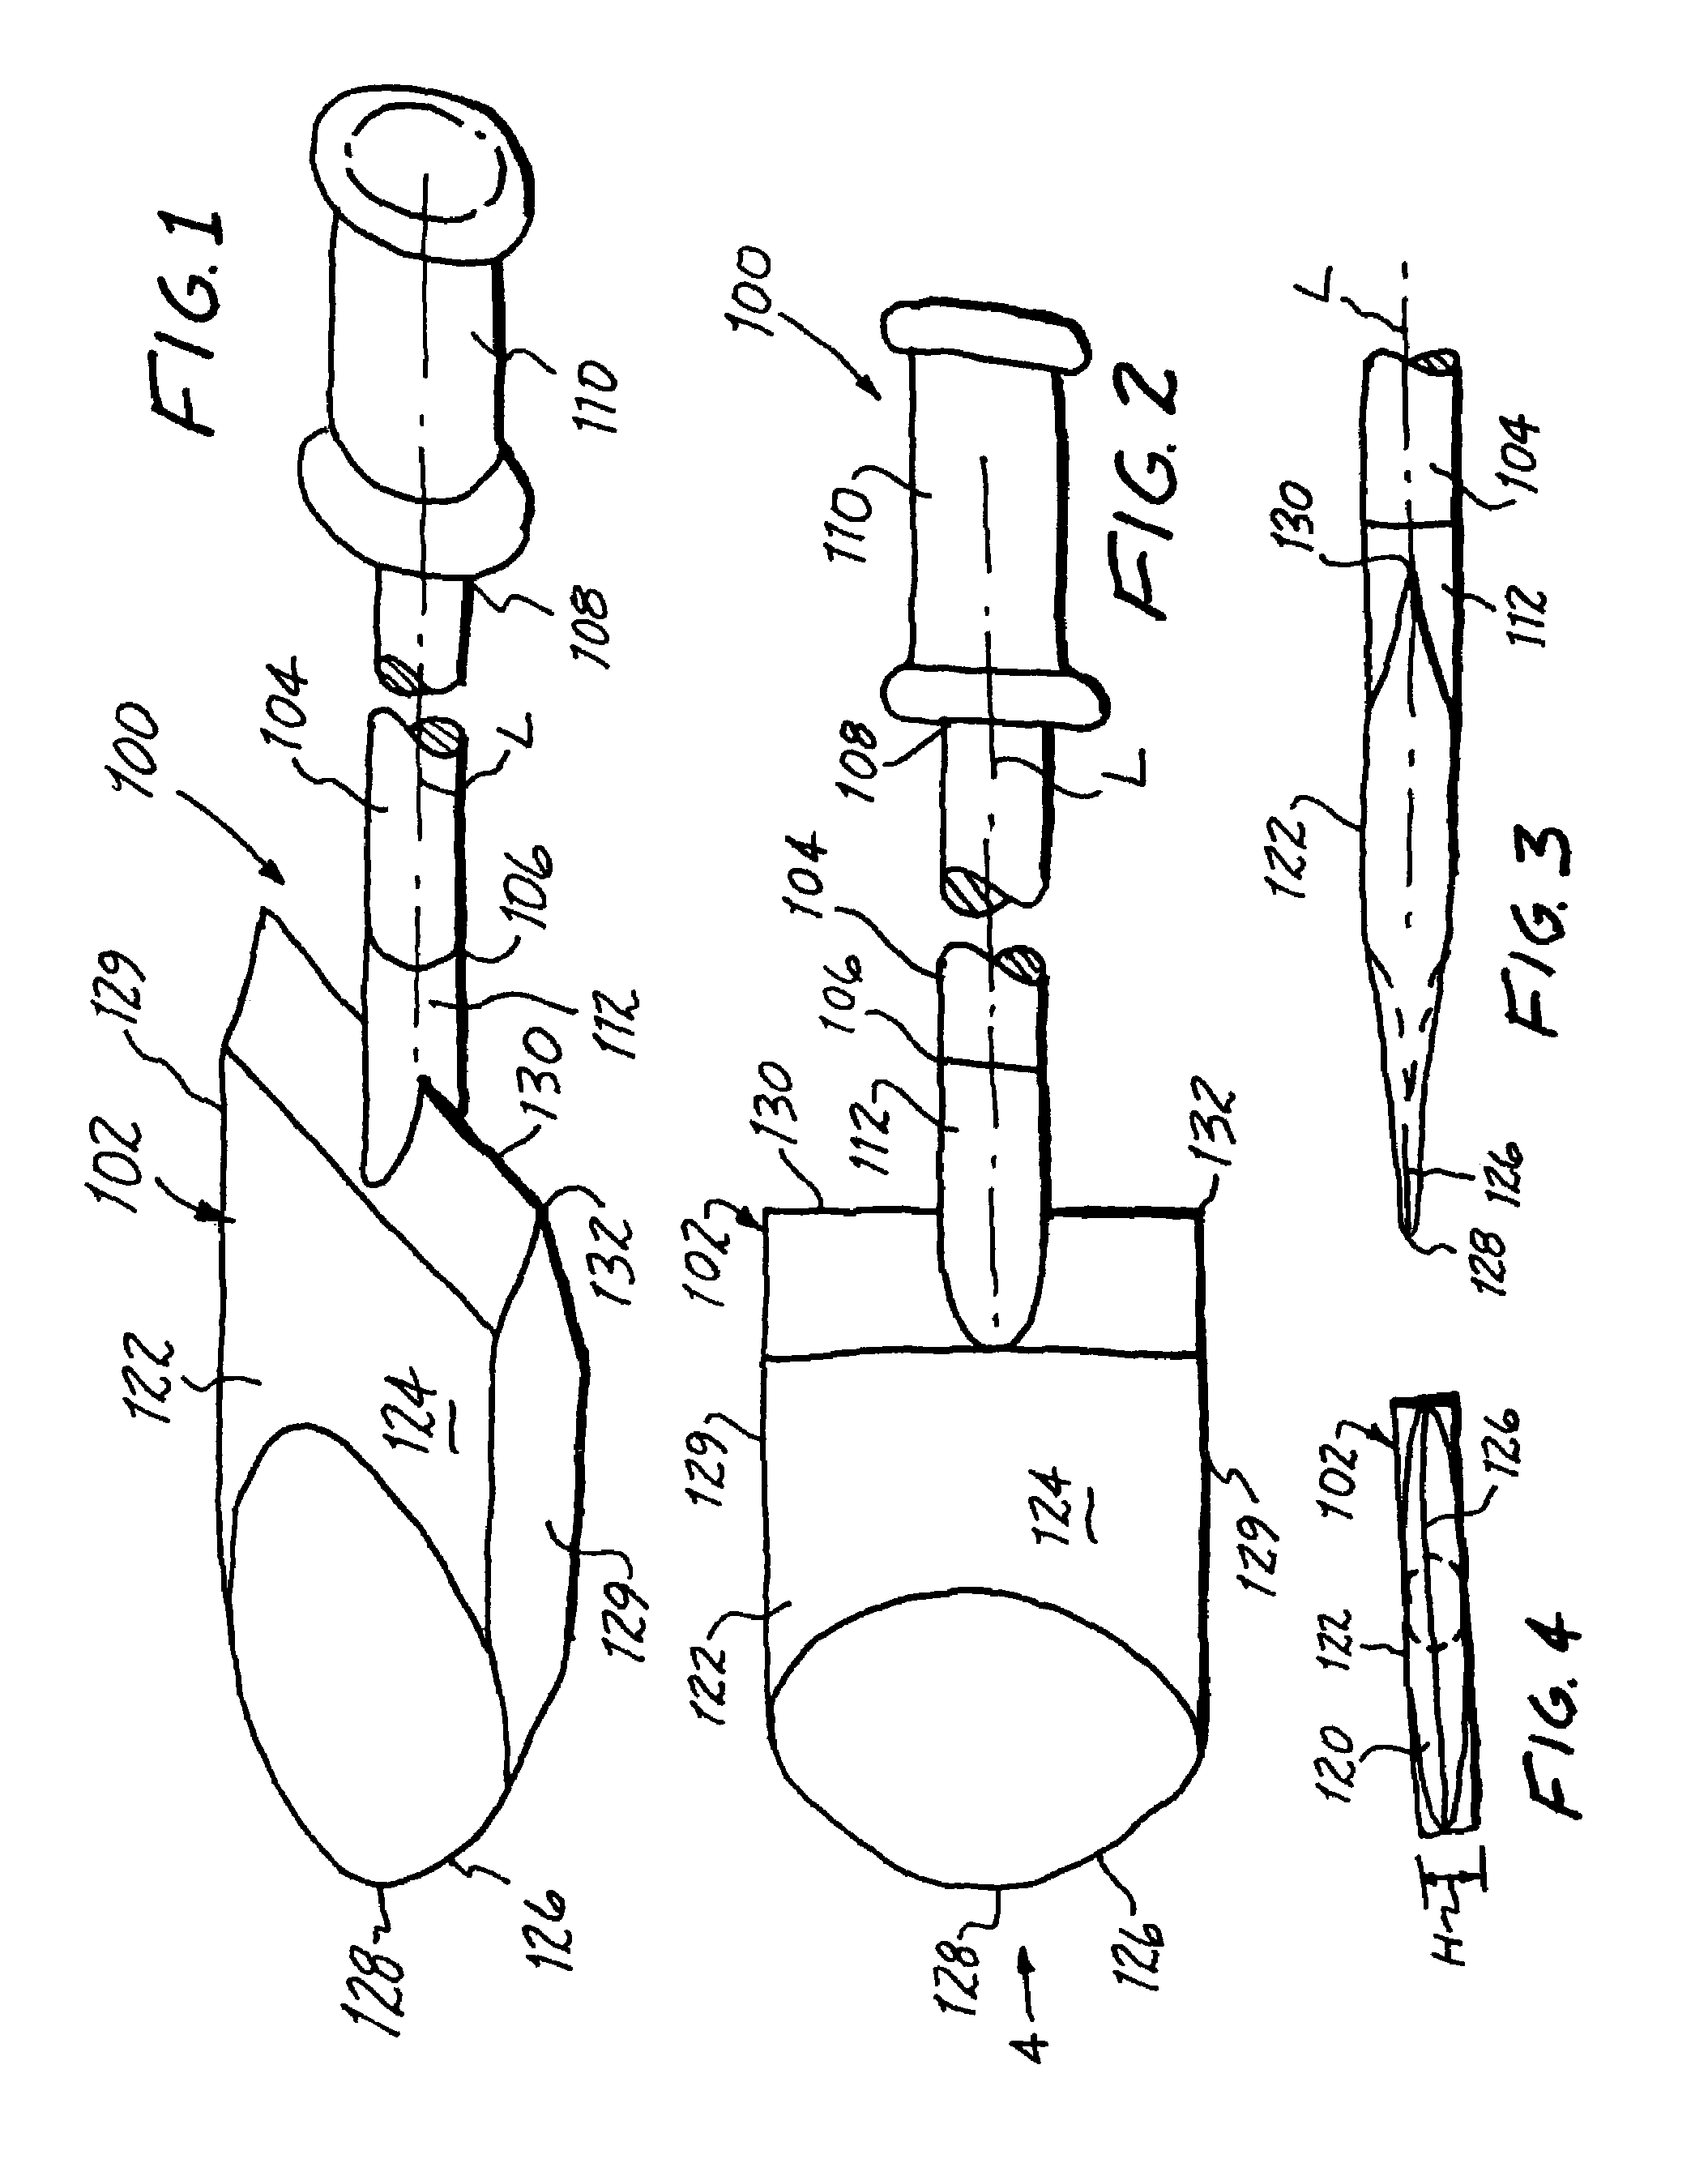 Apparatus and method for the reduction of bone fractures